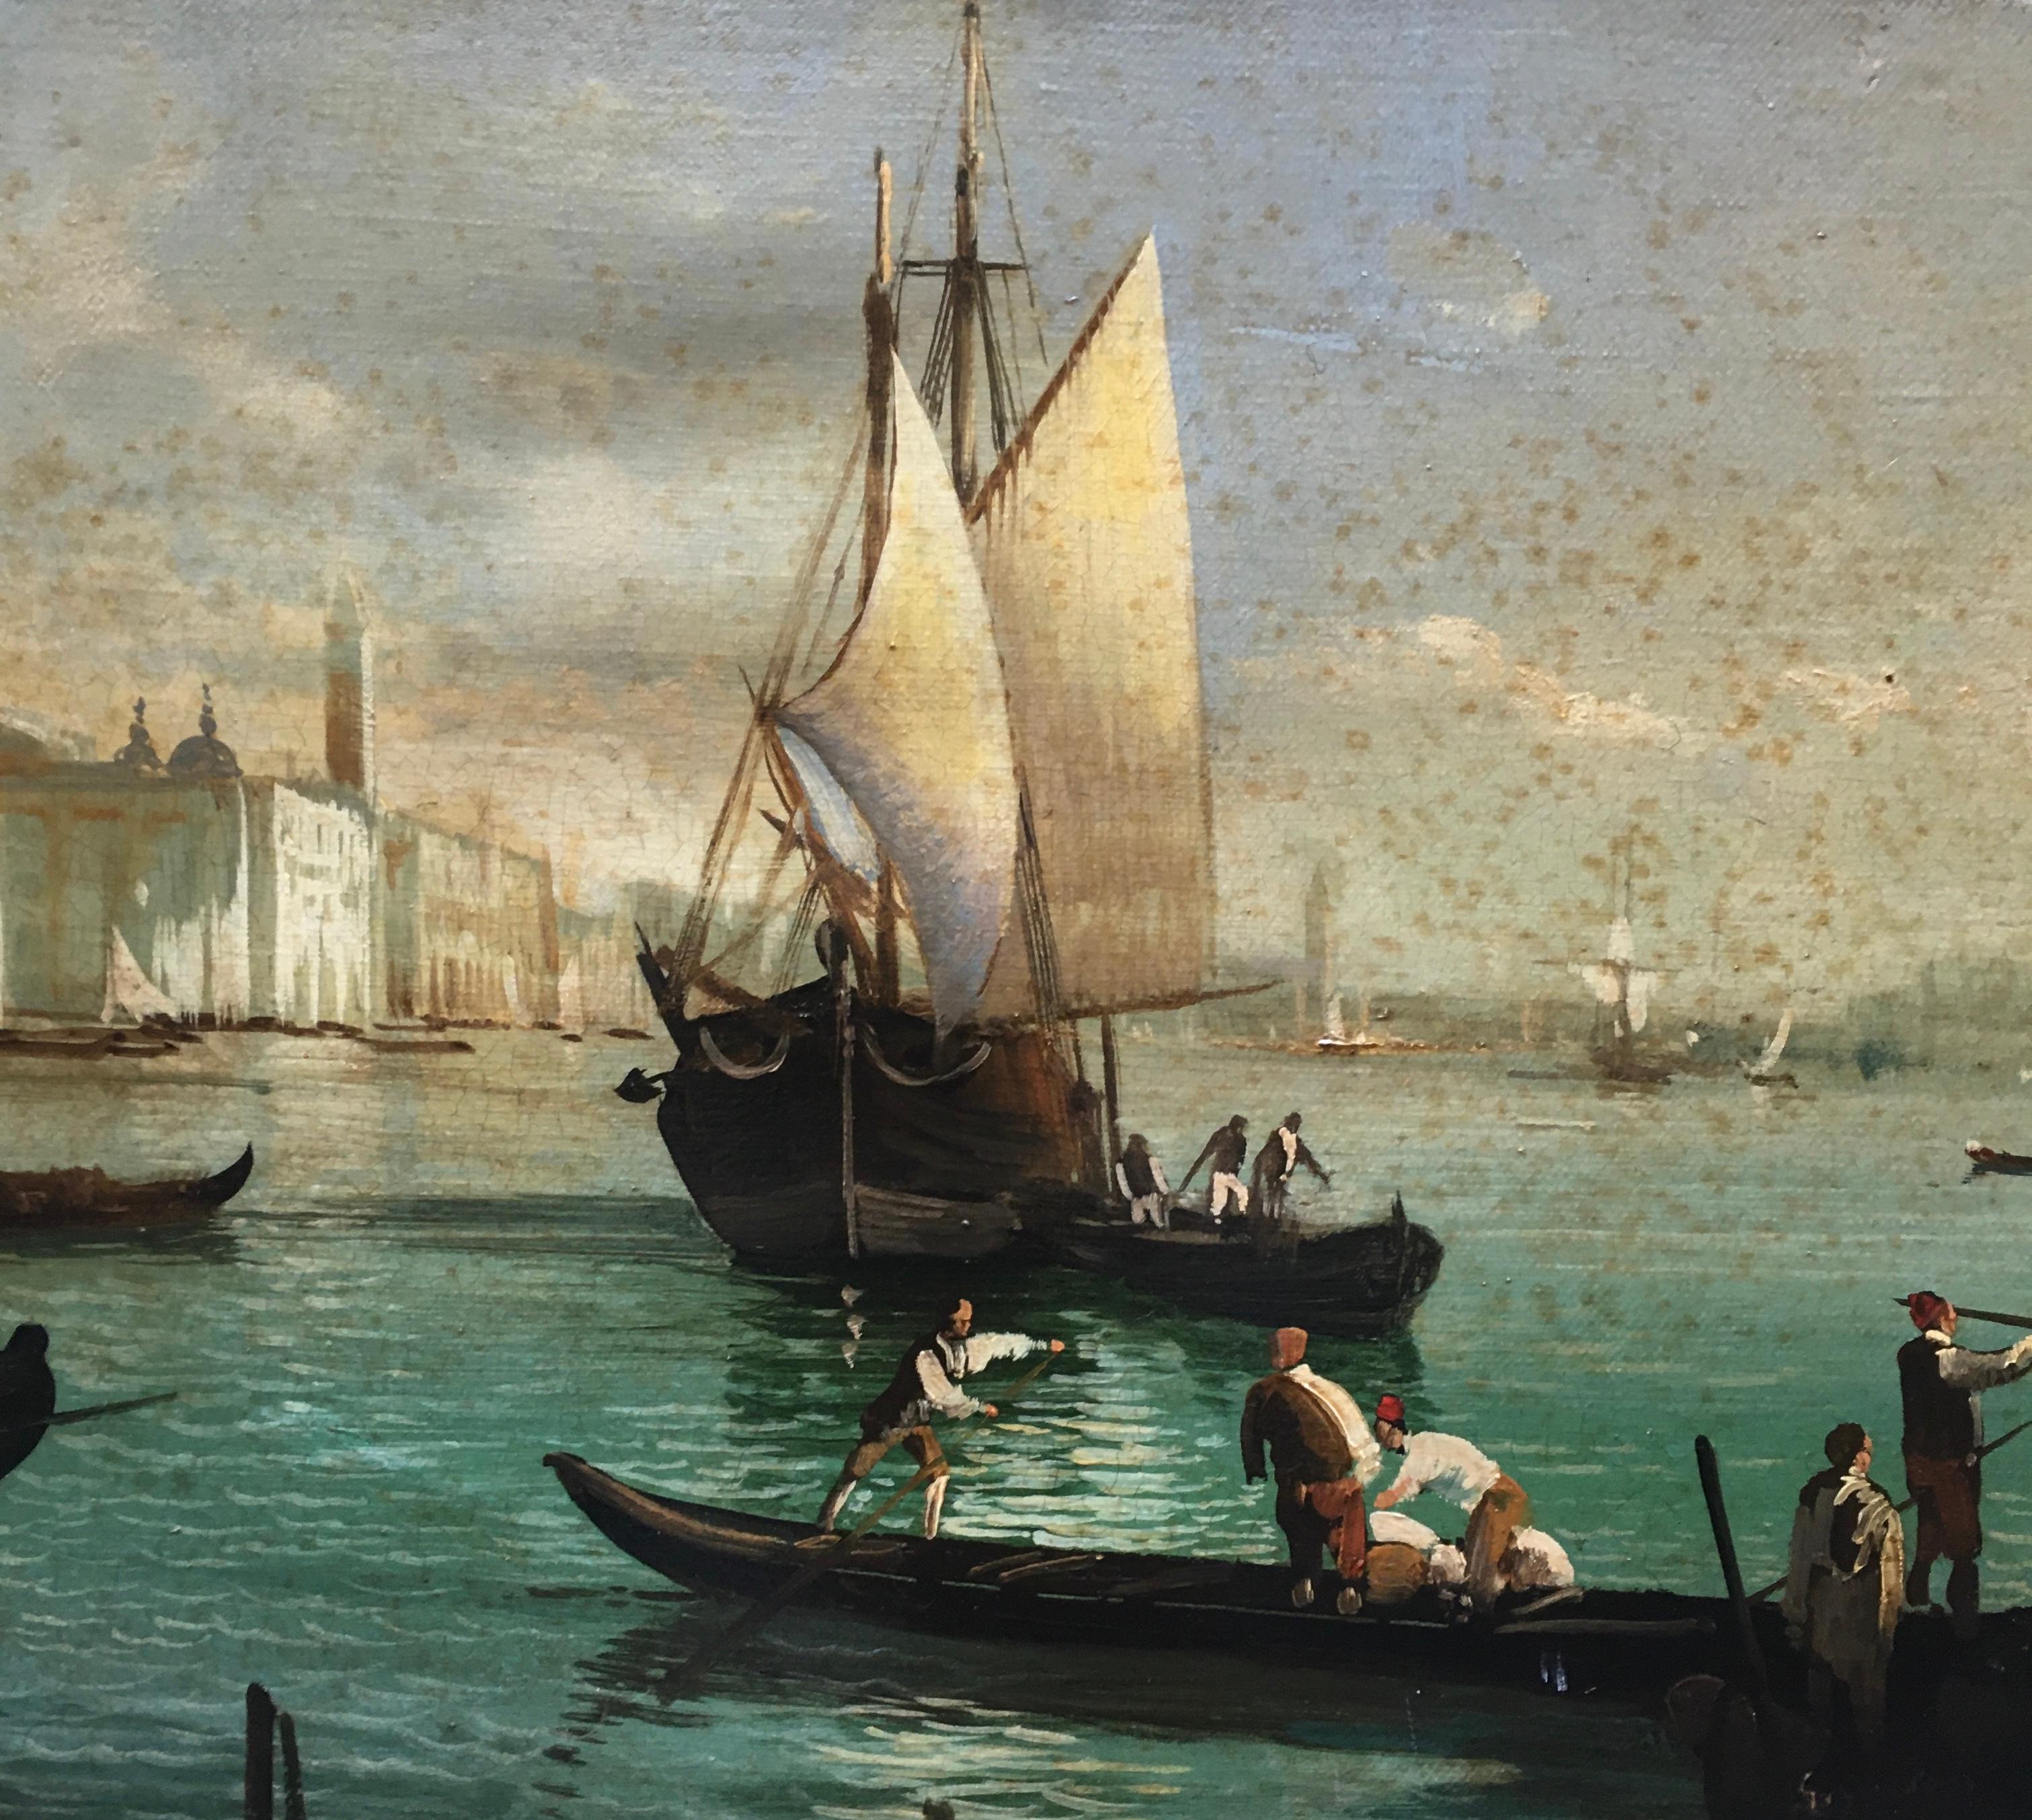 VENICE - Italian landscape oil on canvas oval  painting cm.30x60 by Giancarlo Gorini, Italy 2002.
Gold gilded  wooden frame available on request
Giancarlo Gorini's canvas is an extraordinary work of Italian landscape painting. It is inspired by the